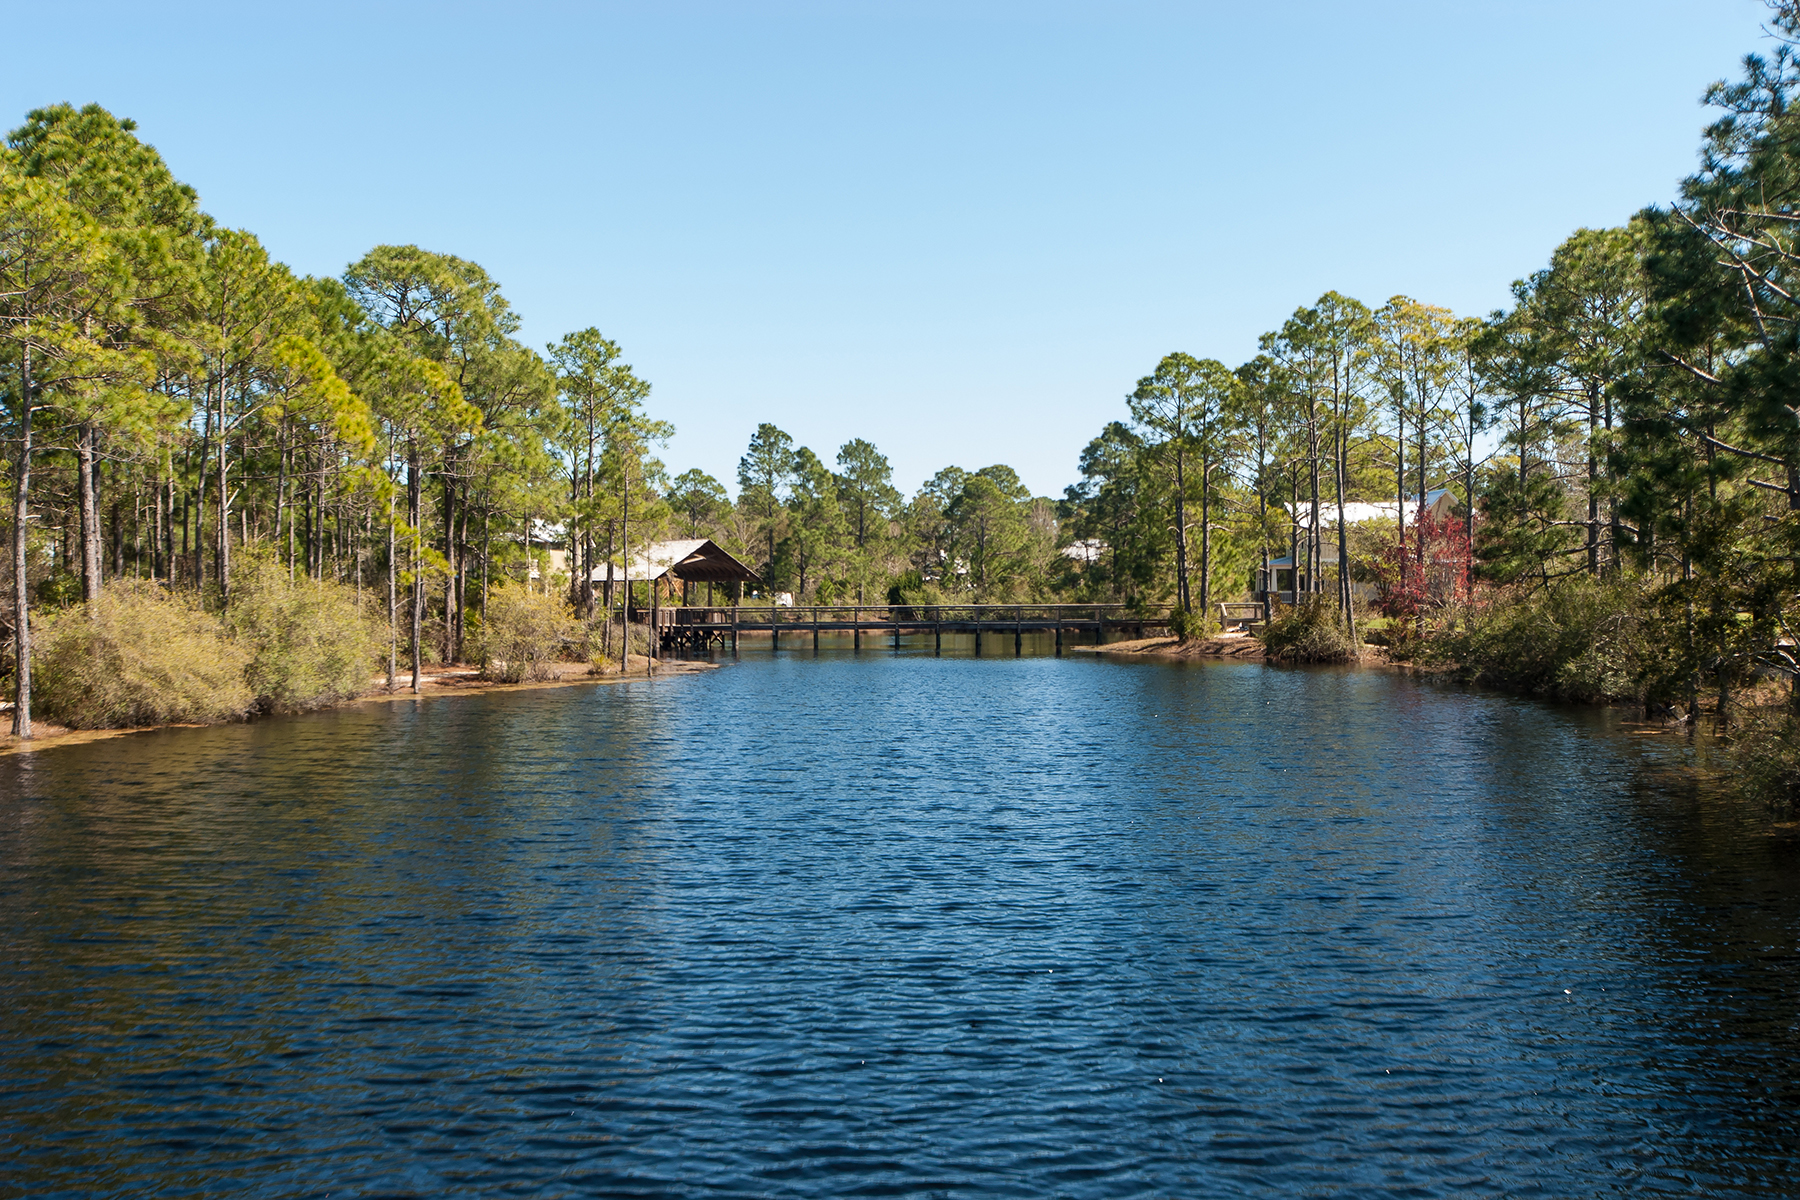 A view across the lake in the Forest Lakes community on a peaceful still day